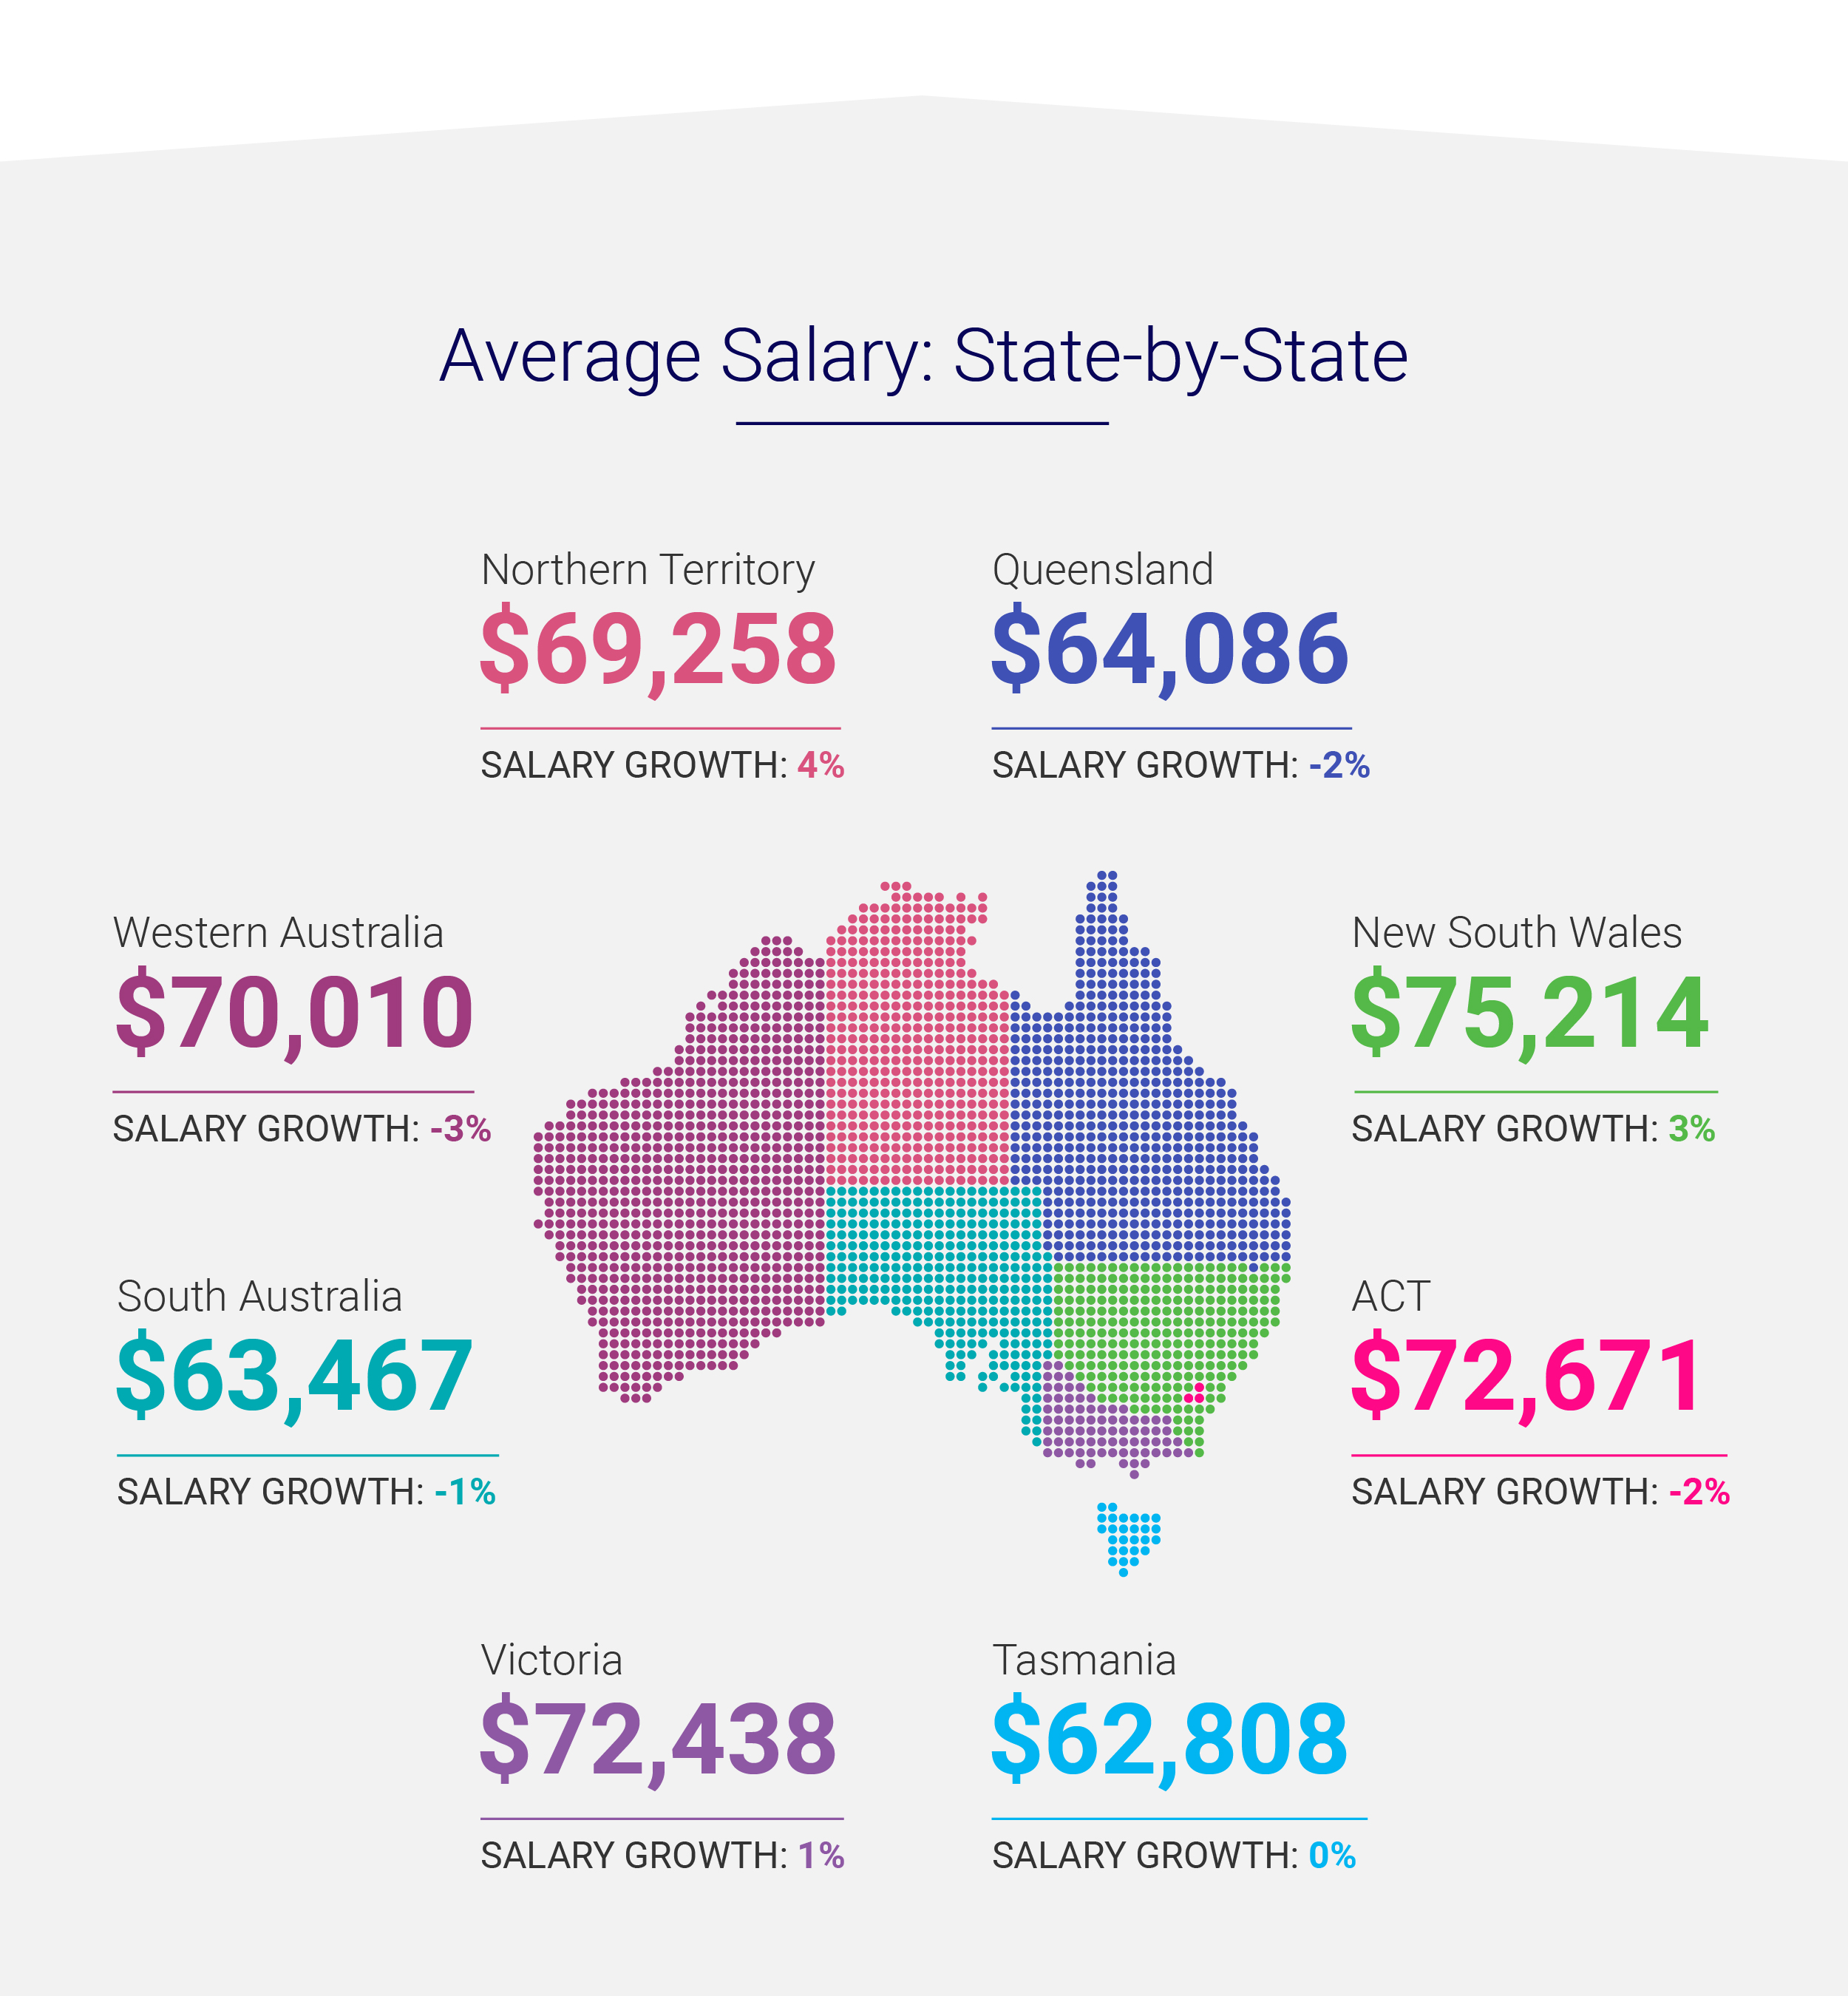 Average salary state by state